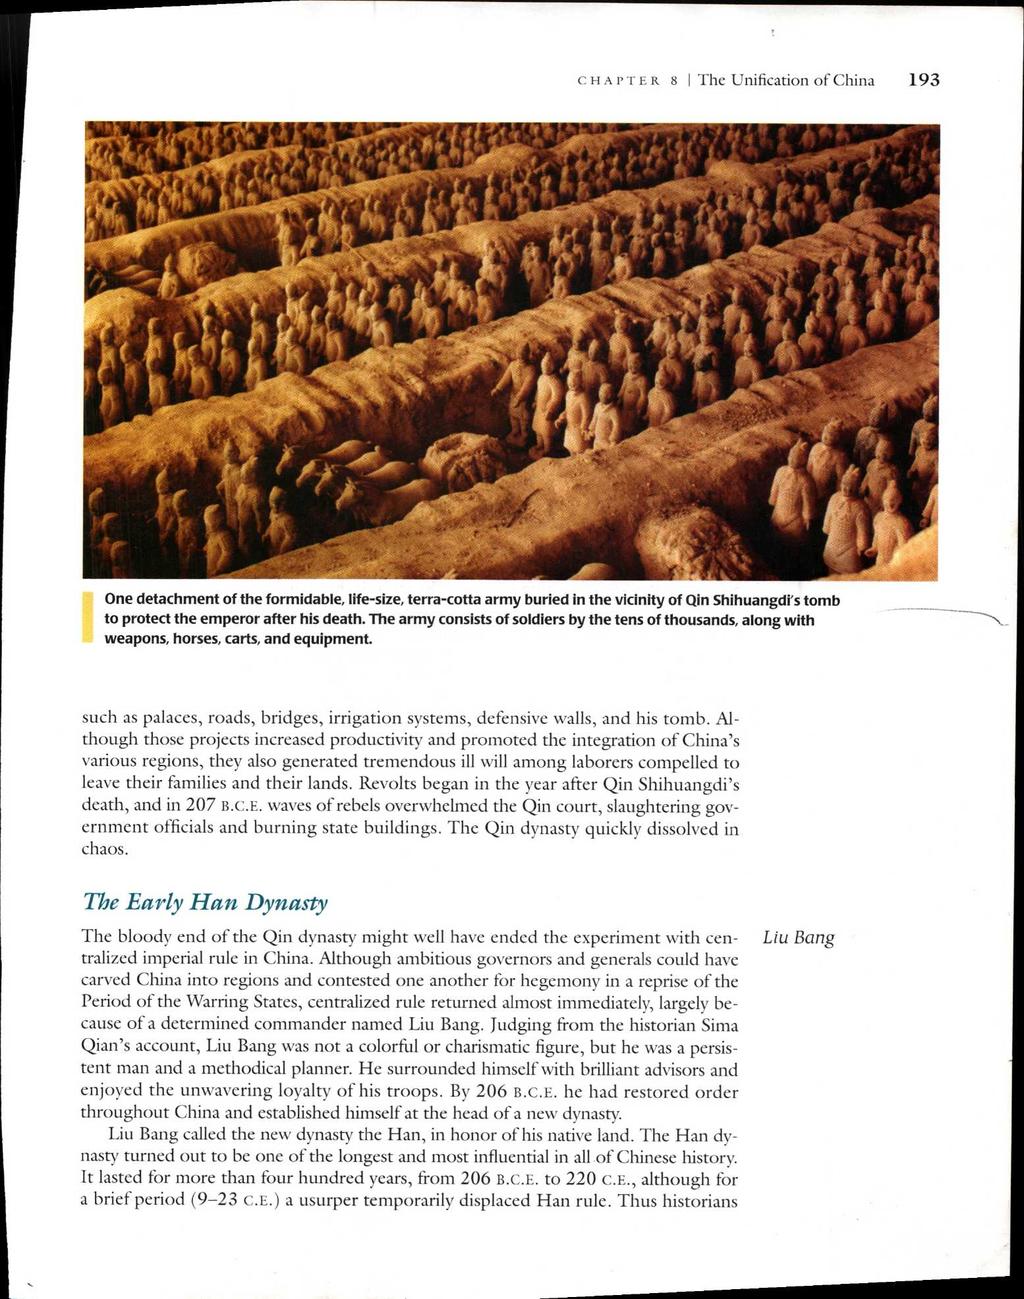 CHAPTER 8 I The Unification of China 193 One detachment of the formidable, life-size, terra-cotta army buried in the vicinity of Qin Shihuangdi's tomb to protect the emperor after his death.